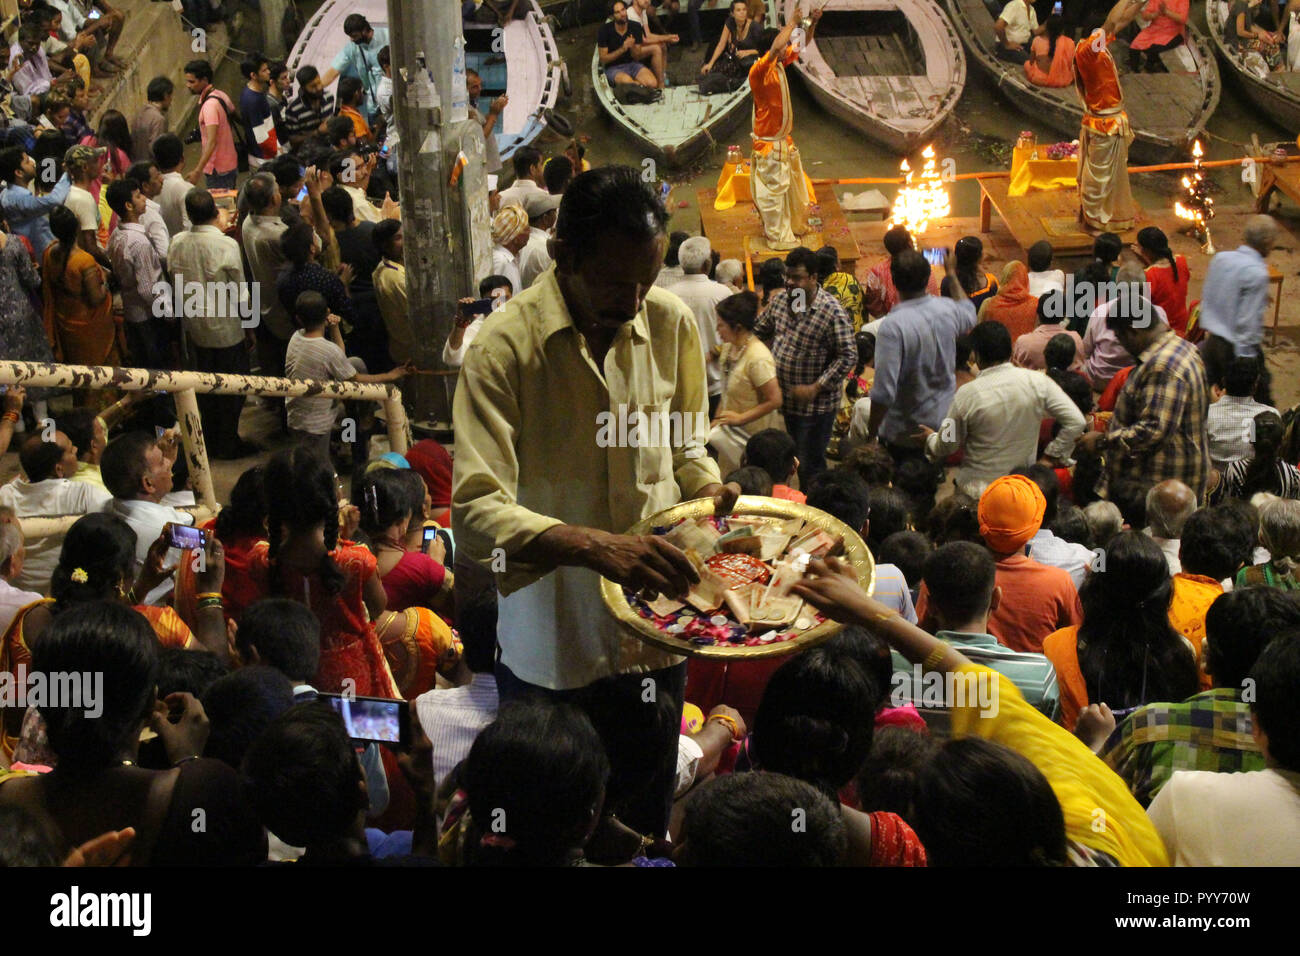 The offering during the famous fire (?) ritual and procession in Varanasi. Taken in India, August 2018. Stock Photo